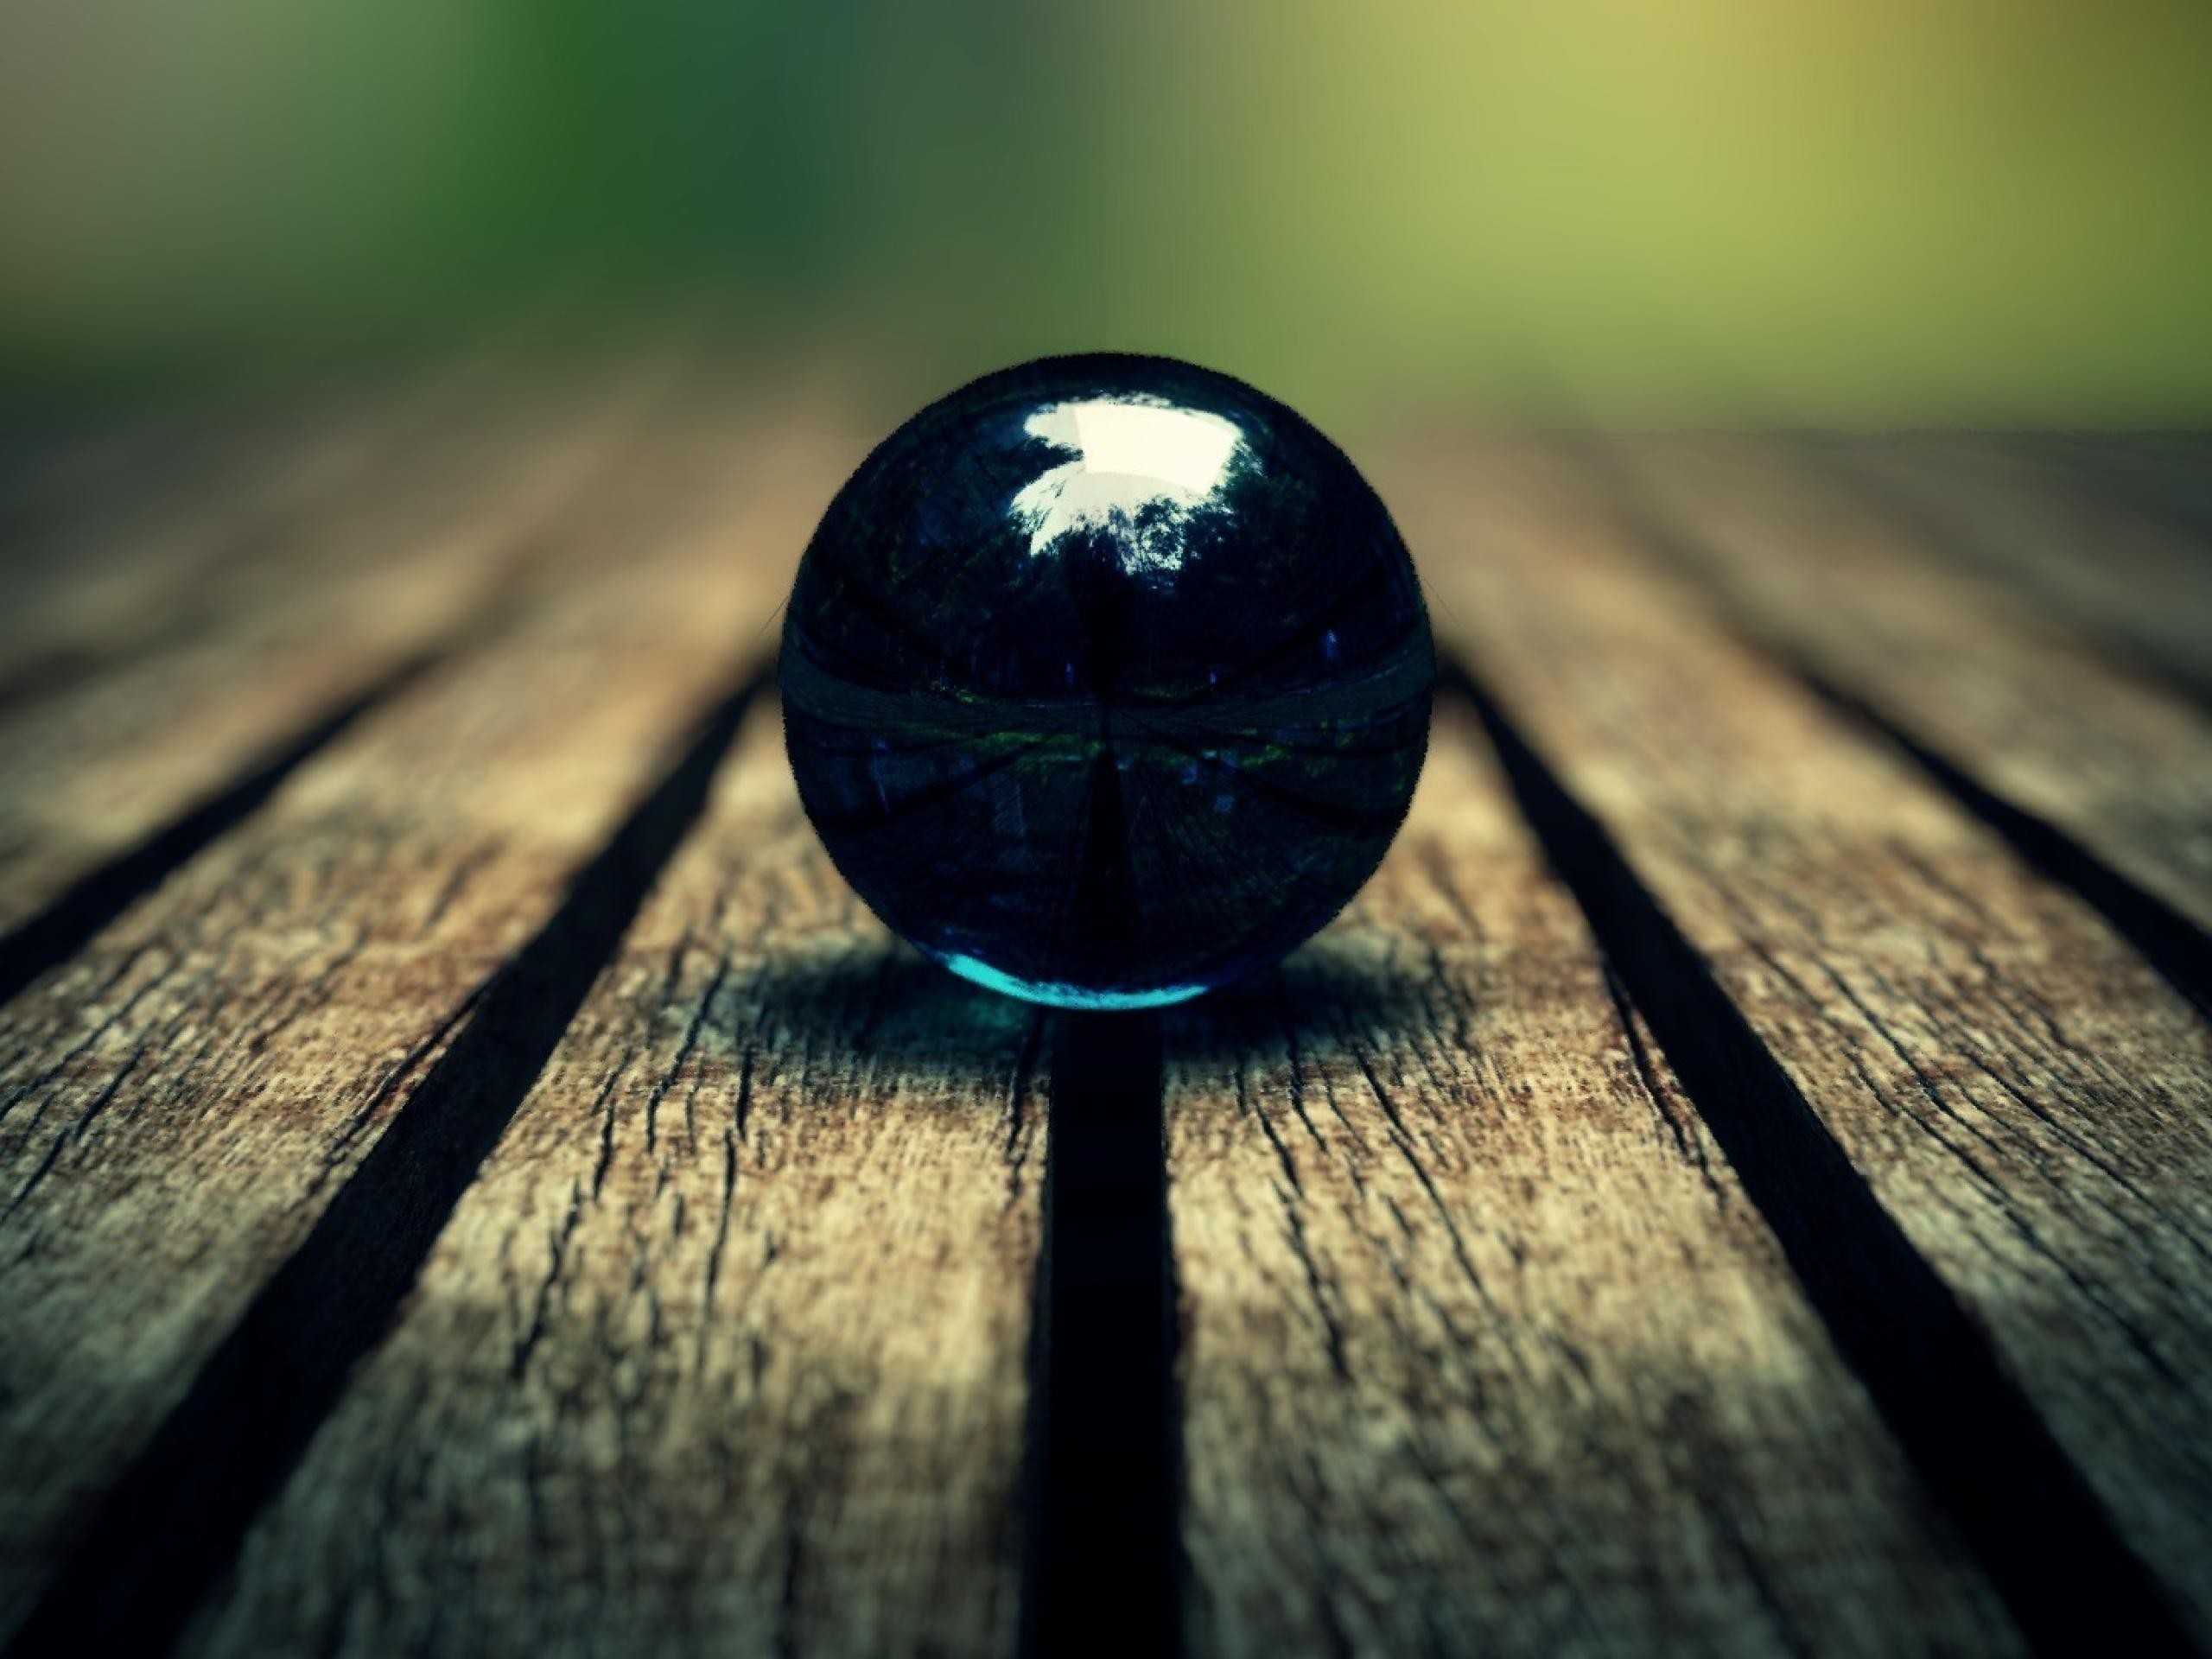 blue, photography, close up, ball, globe, marble, nature, wood images